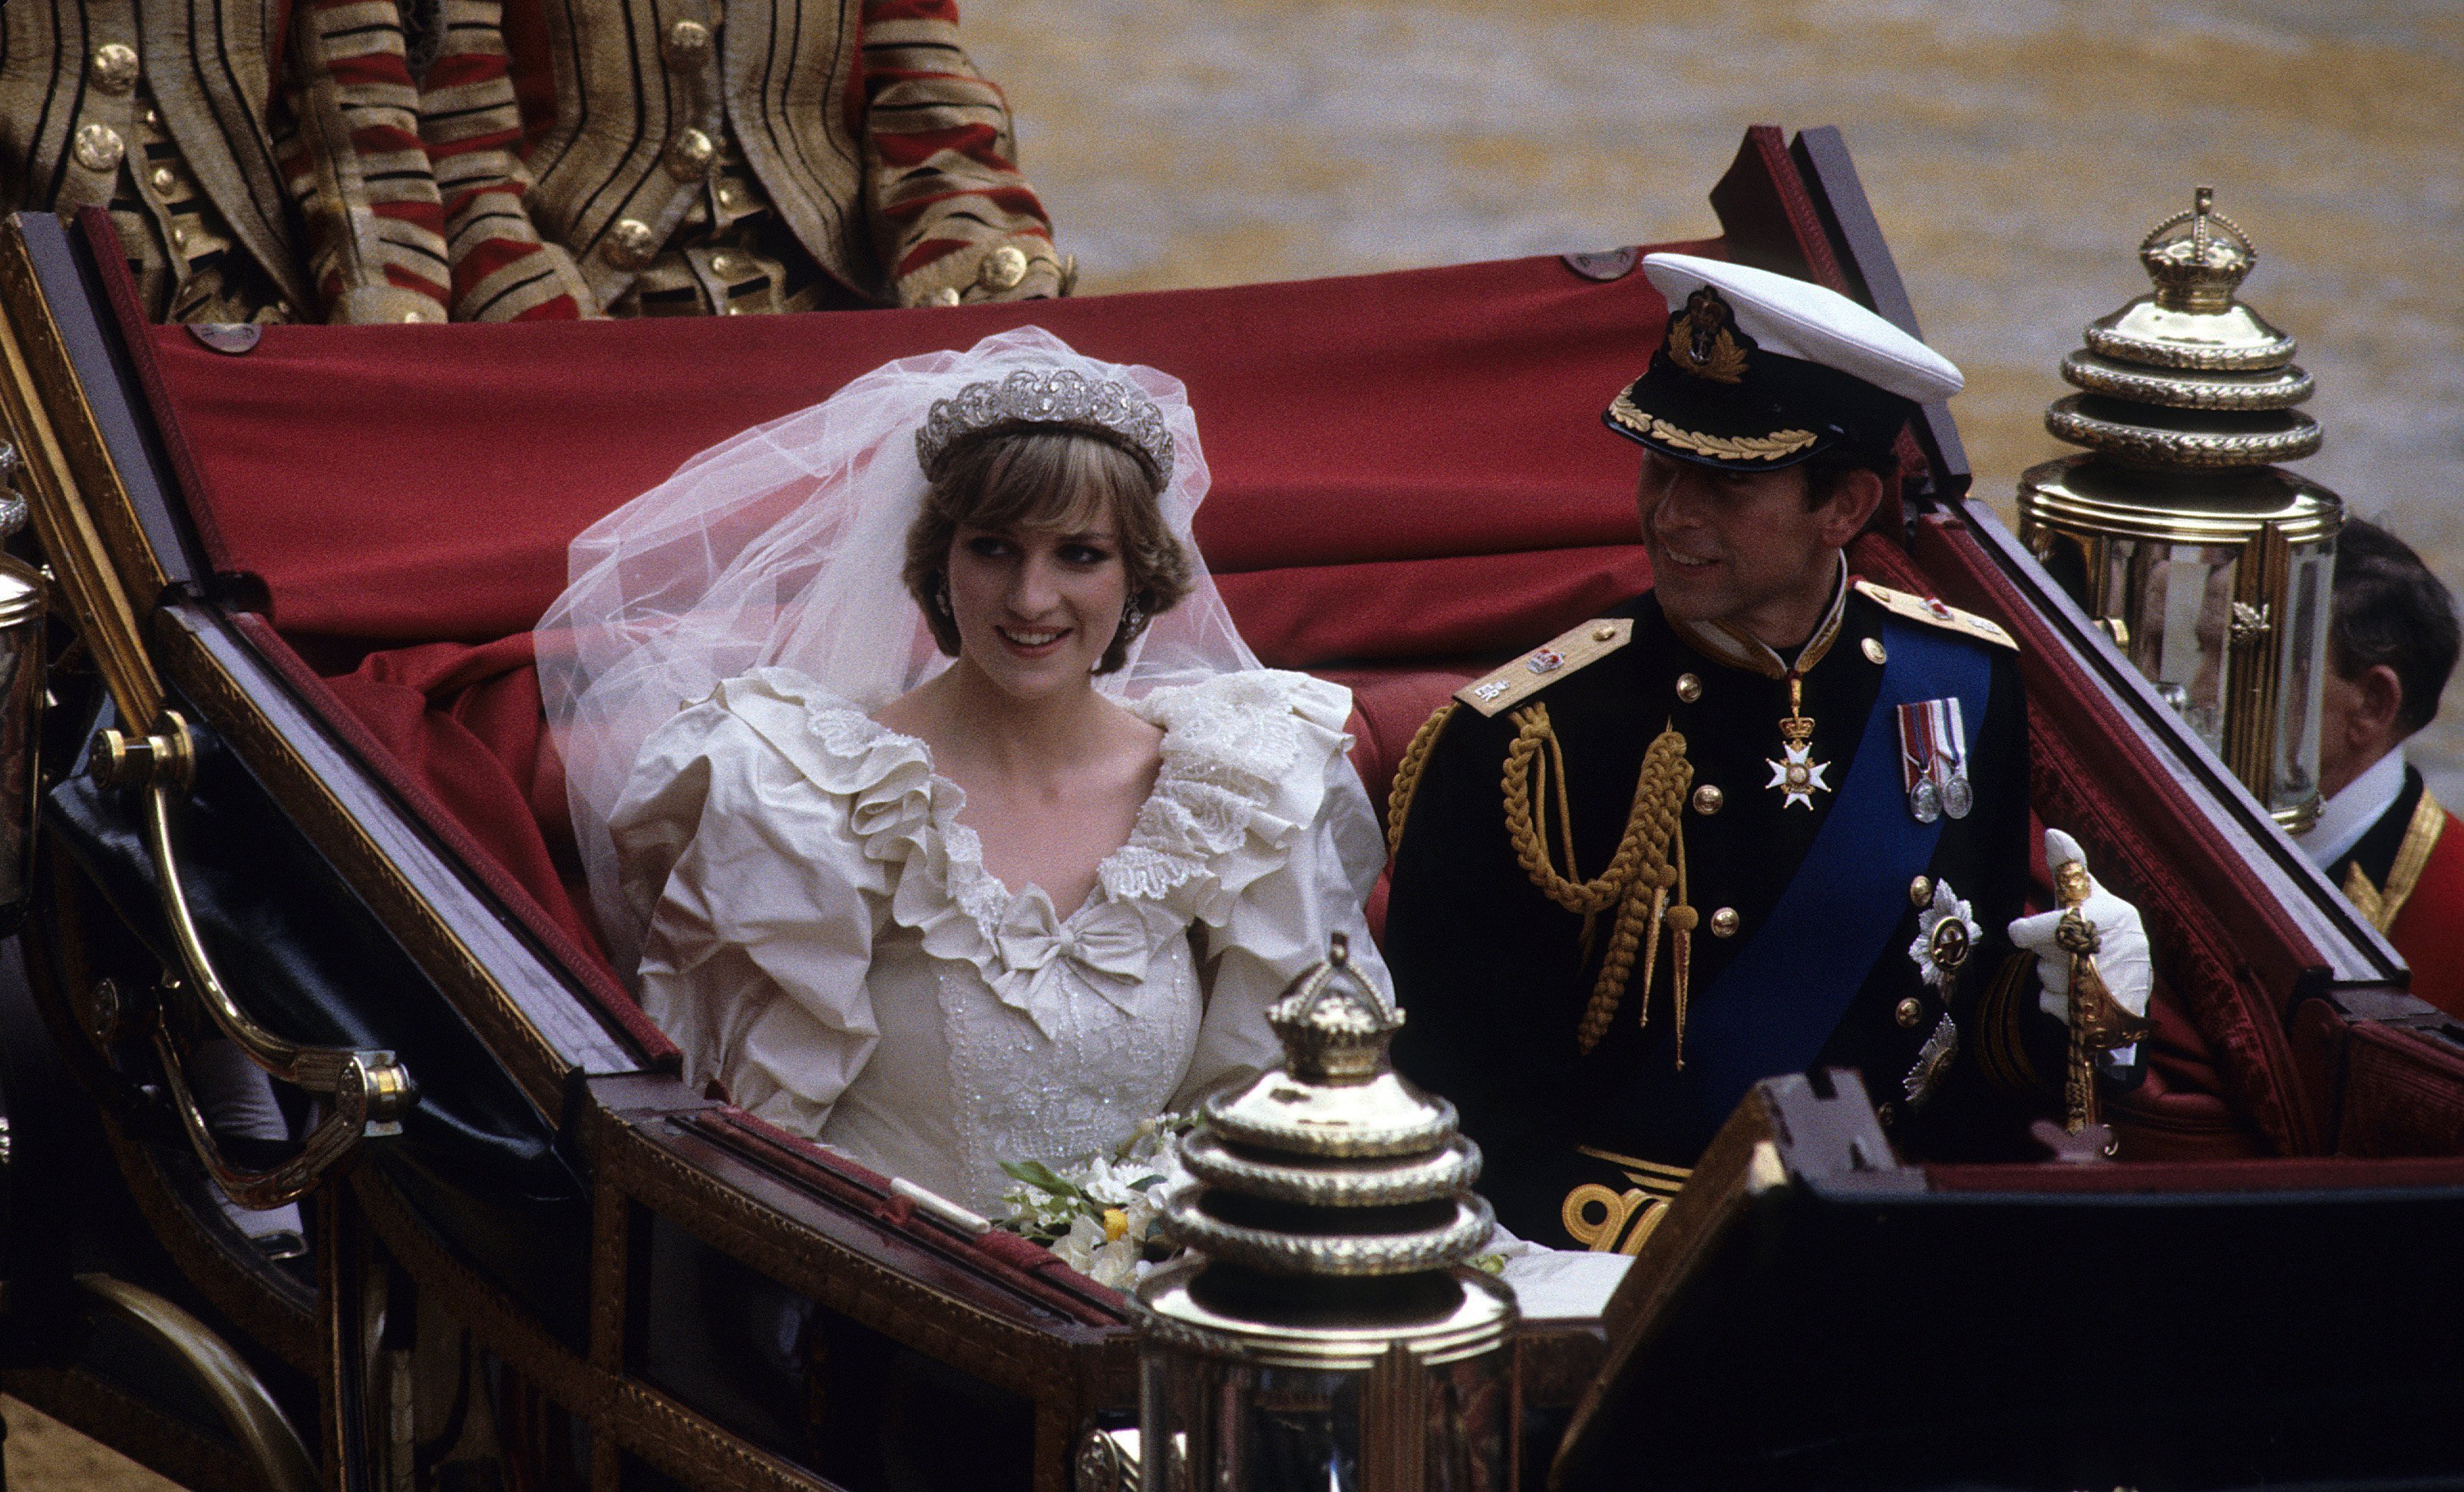 Prince Charles and late Princess Diana leave St. Paul's cathedral in a carriage following their wedding July 29, 1981. | Source: Getty Images